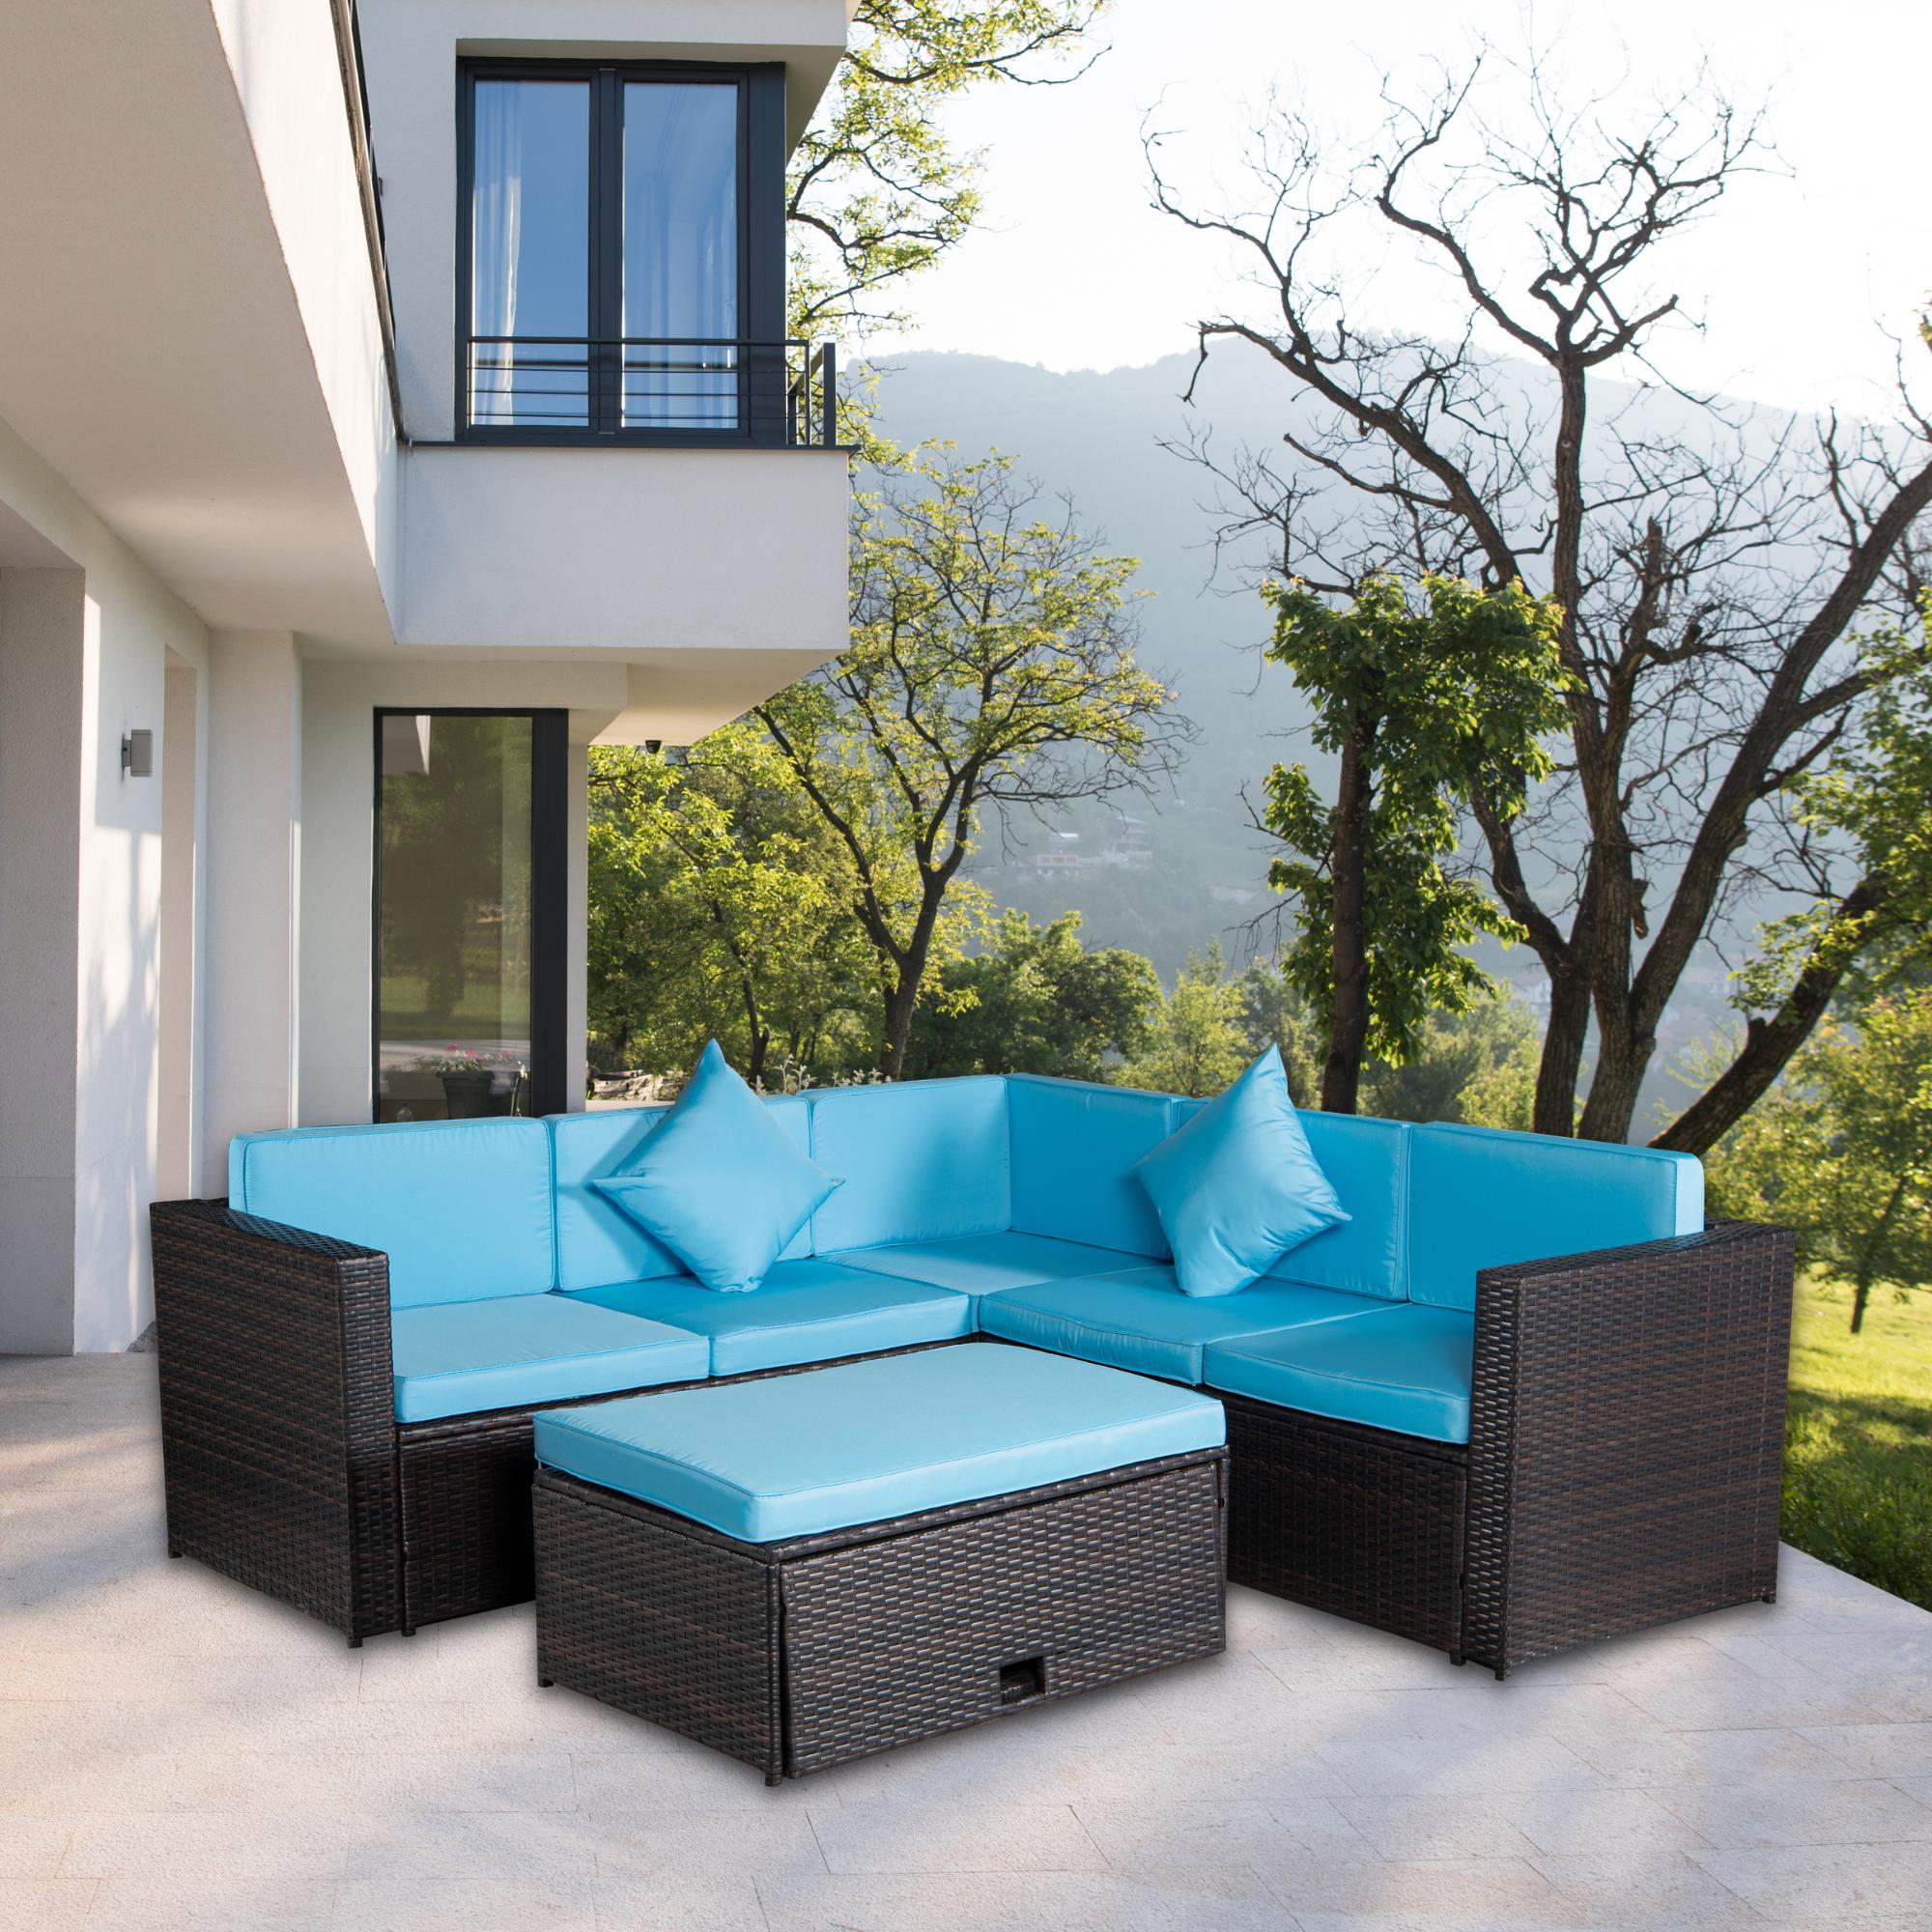 4 Pieces Patio Conversation Sets on Clearance, 4 Pieces Outdoor Wicker Patio Furniture Set with Seat Cushions & Tempered Glass Dining Table, Wicker Sofa Sets for Porch Poolside Backyard Garden, S8177 - image 1 of 10